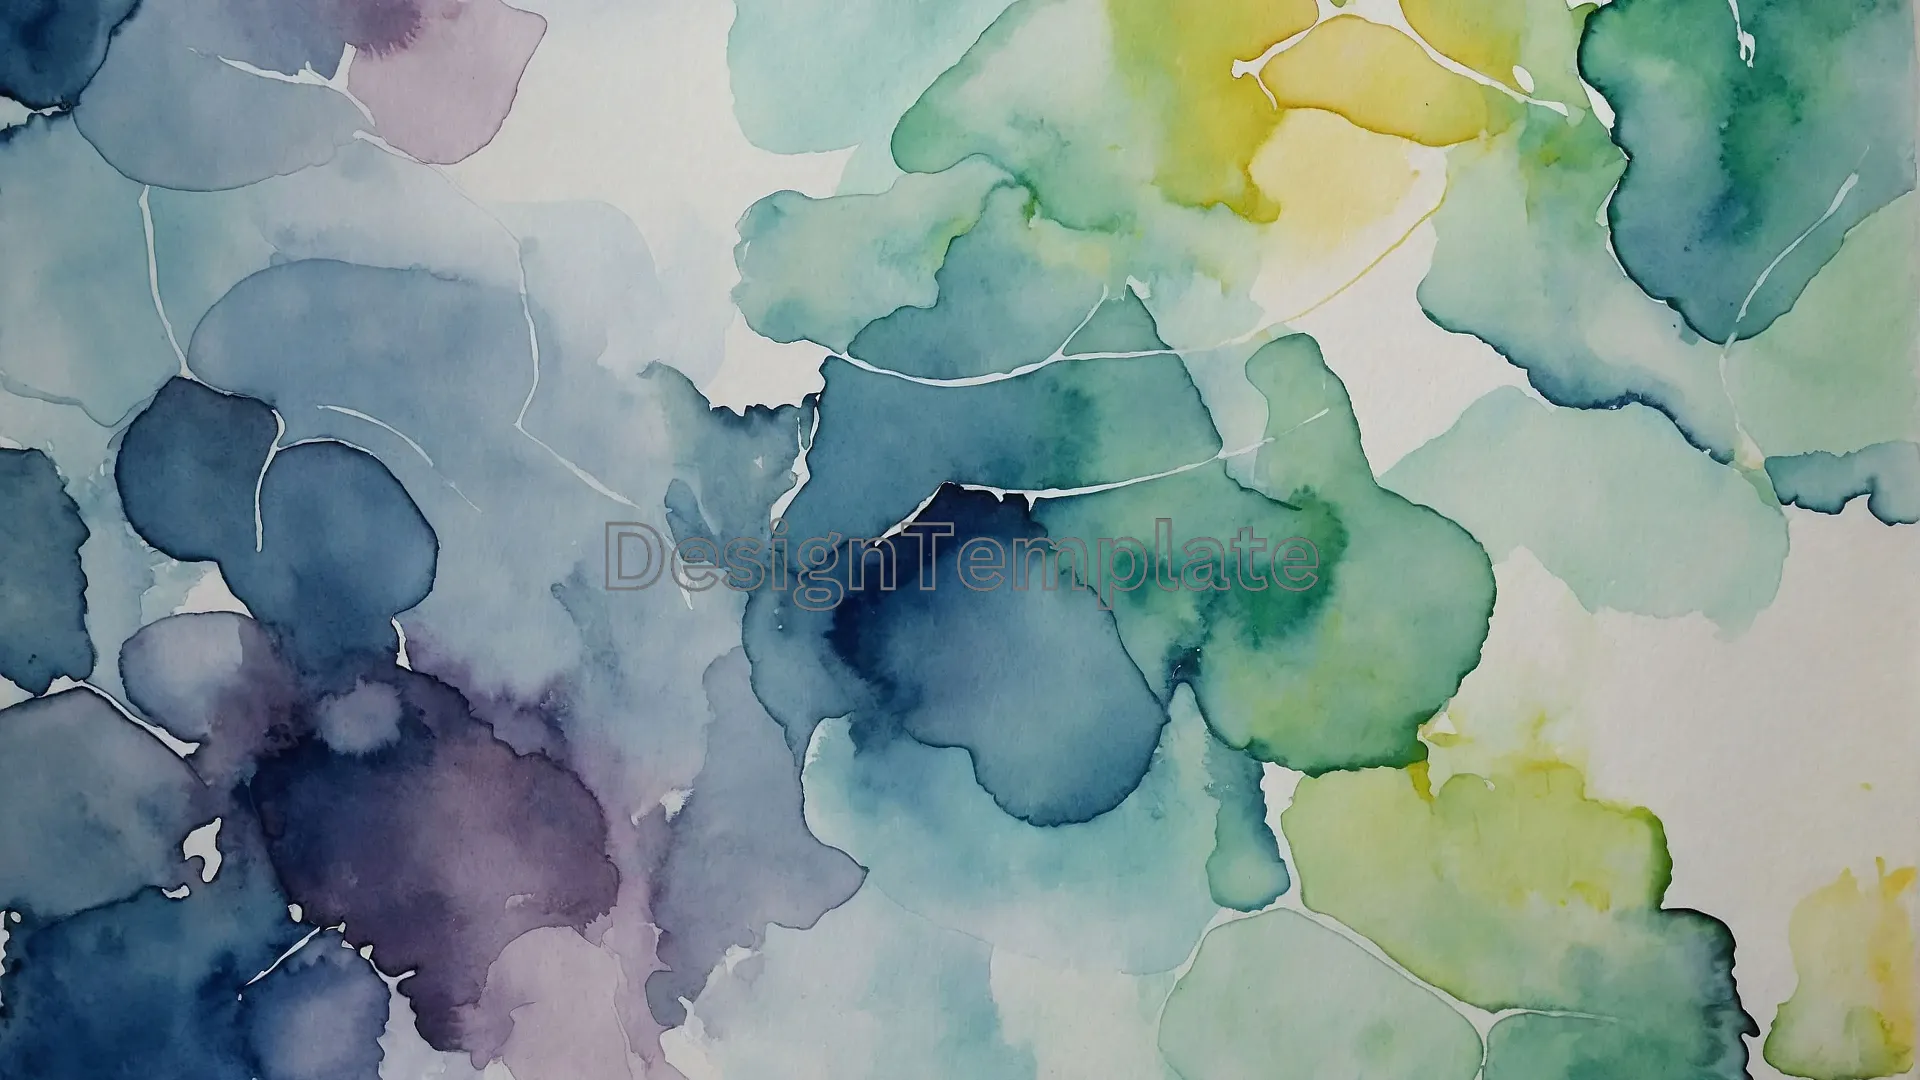 Watercolor Paint Abstract Texture Jpg